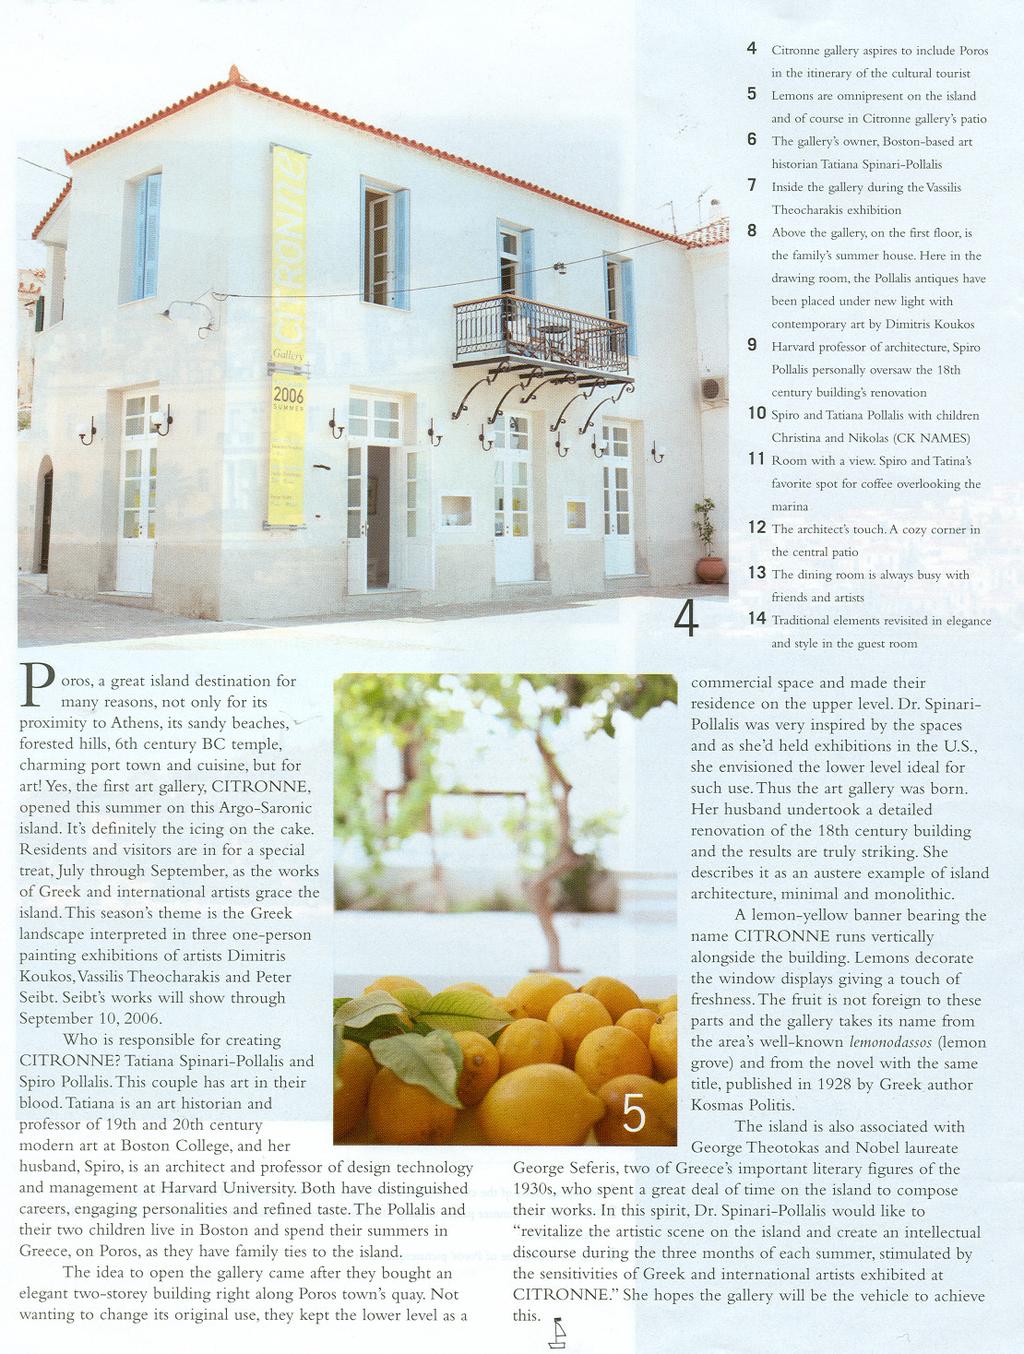 4 Citronne gallery aspires to include Poros in the itinerary of the cultural tourist 5 Lemons are omnipresent on the island and of course in Citronne gallery's patio 6 The gallery's owner,